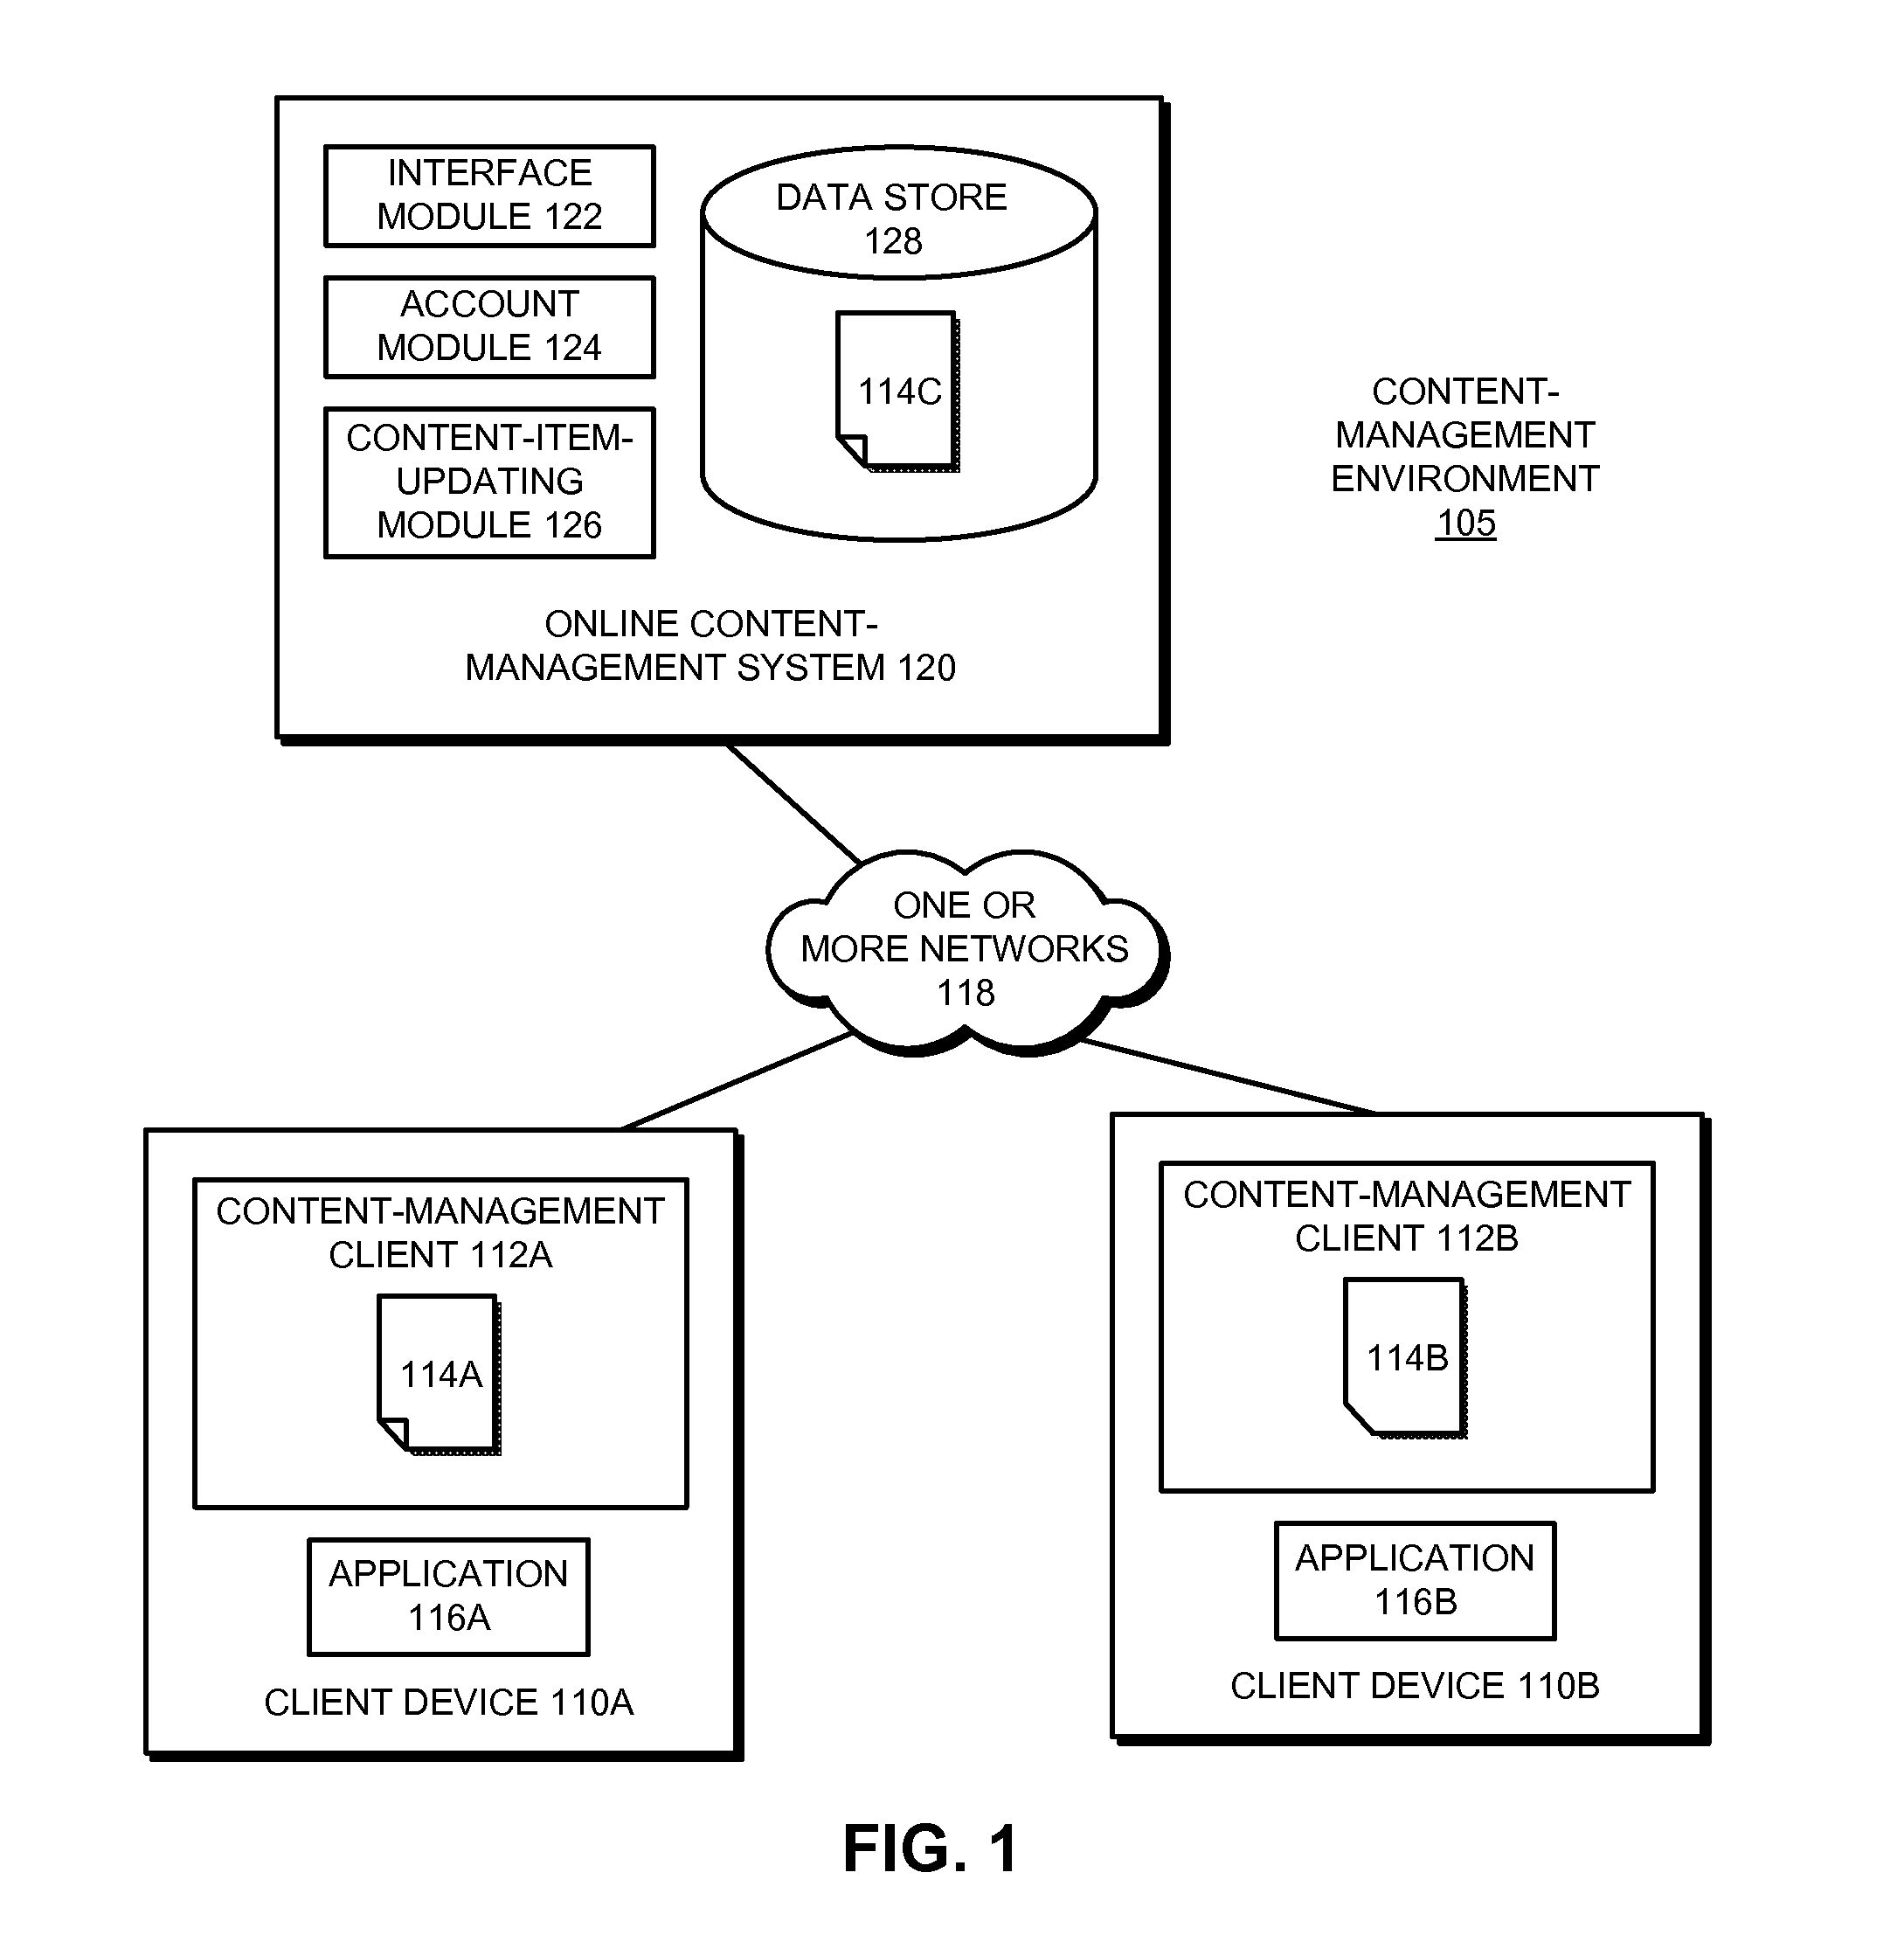 Managing a local cache for an online content-management system